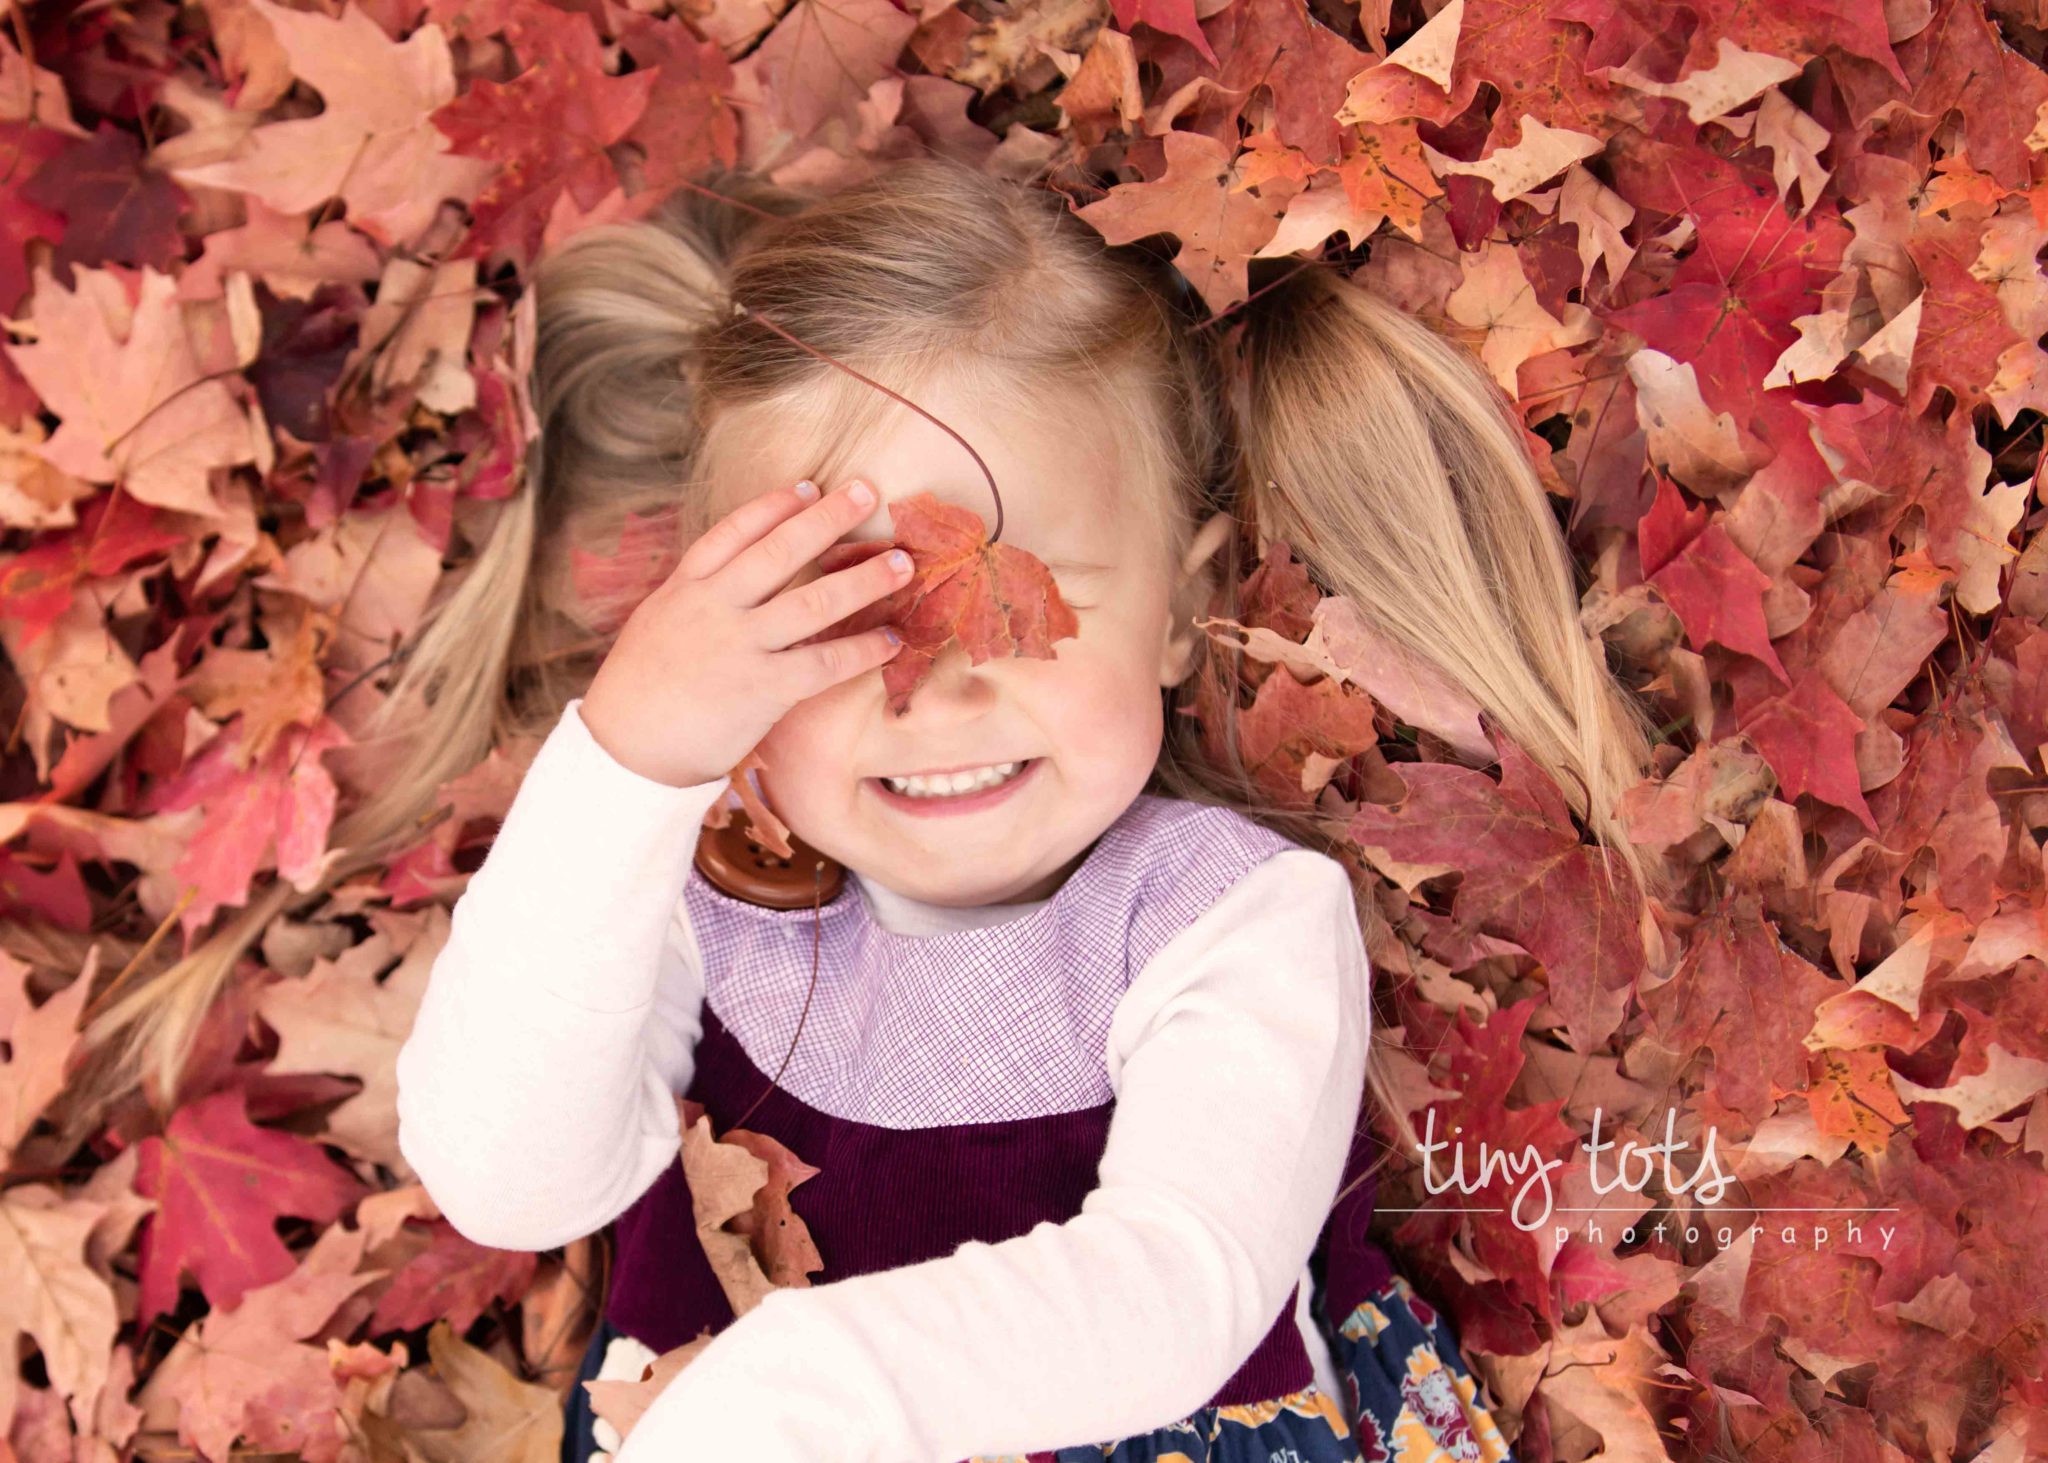 kristen-fotta-photography-a-vibrant-and-colorful-fall-baby-photo-ideas